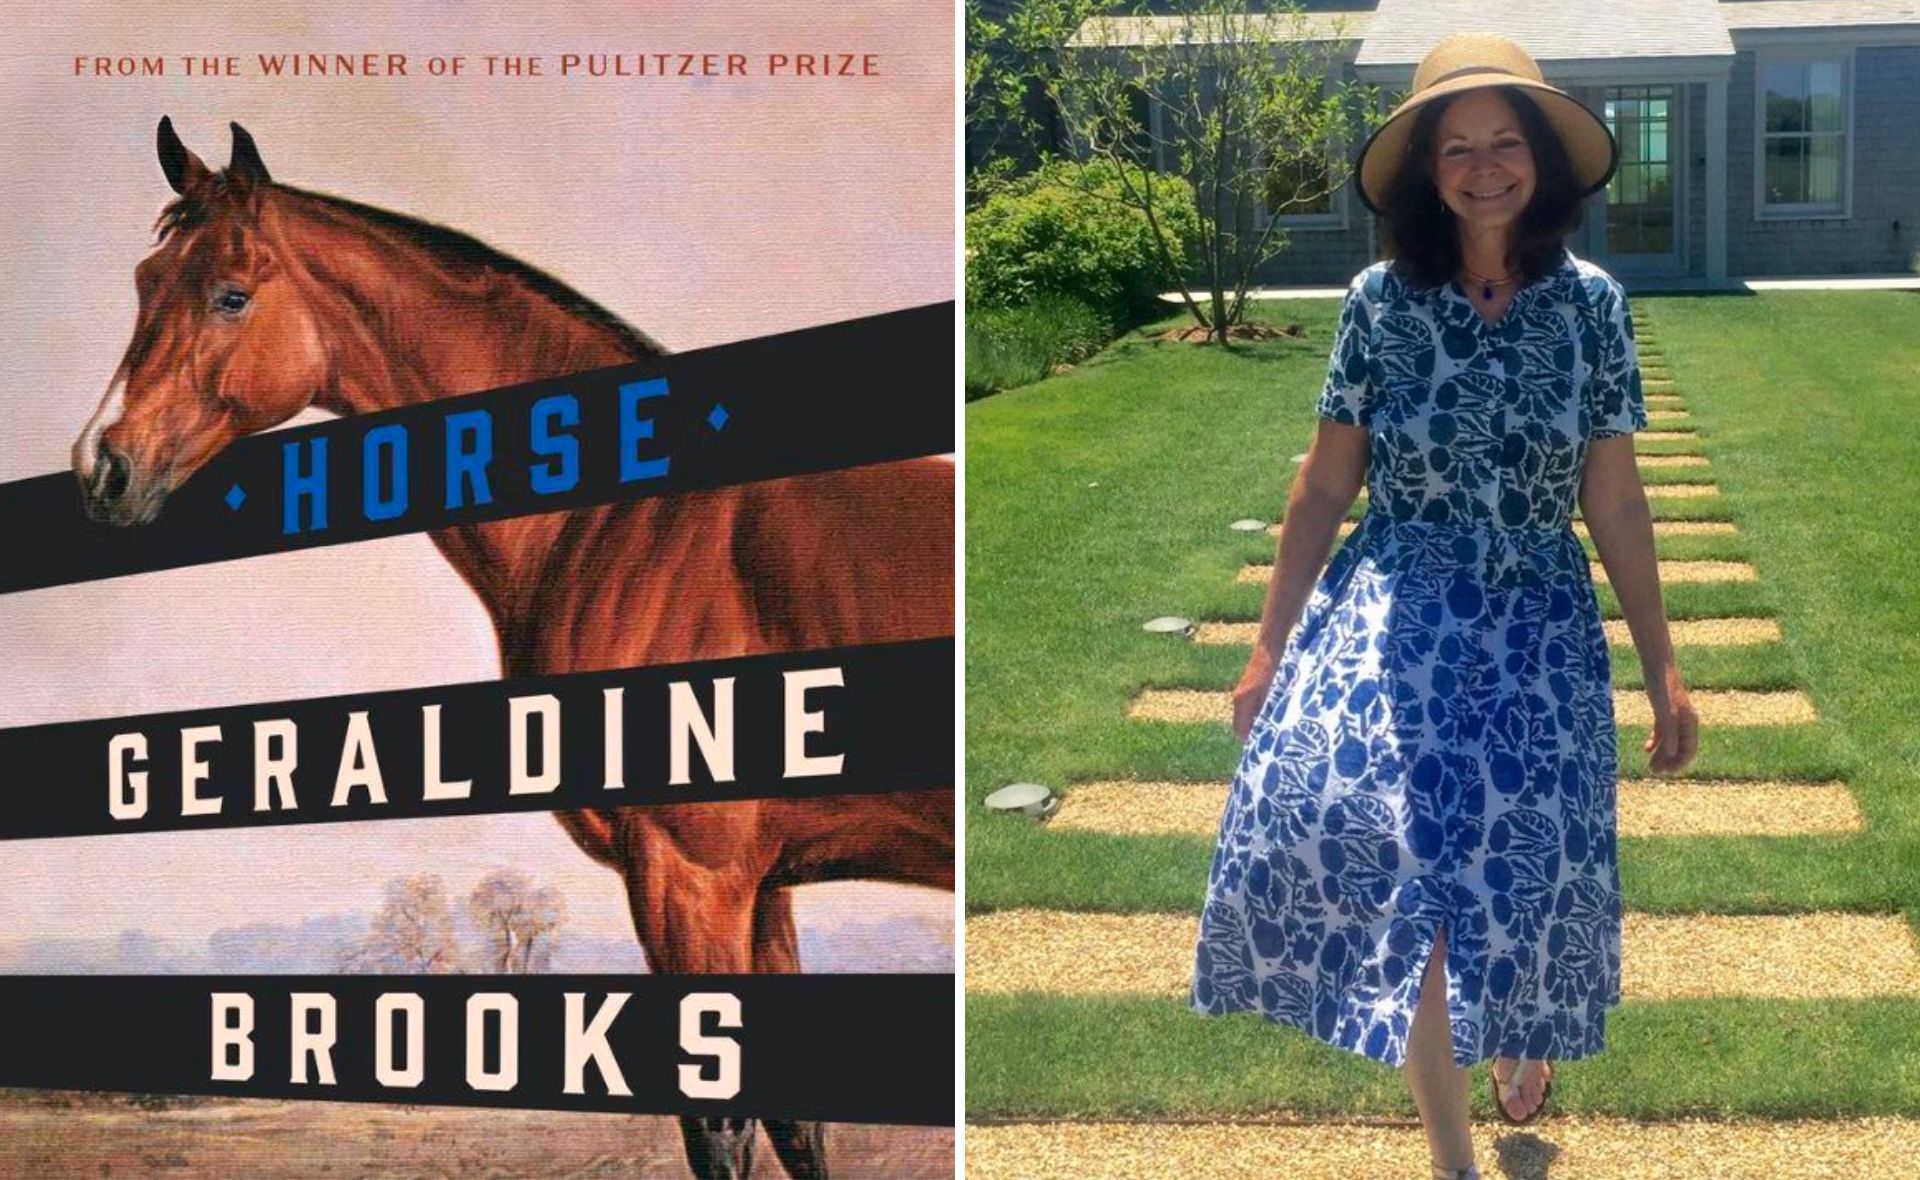 REVIEW: Geraldine Brooks’ sharp and soulful novel Horse was penned during a period of grief